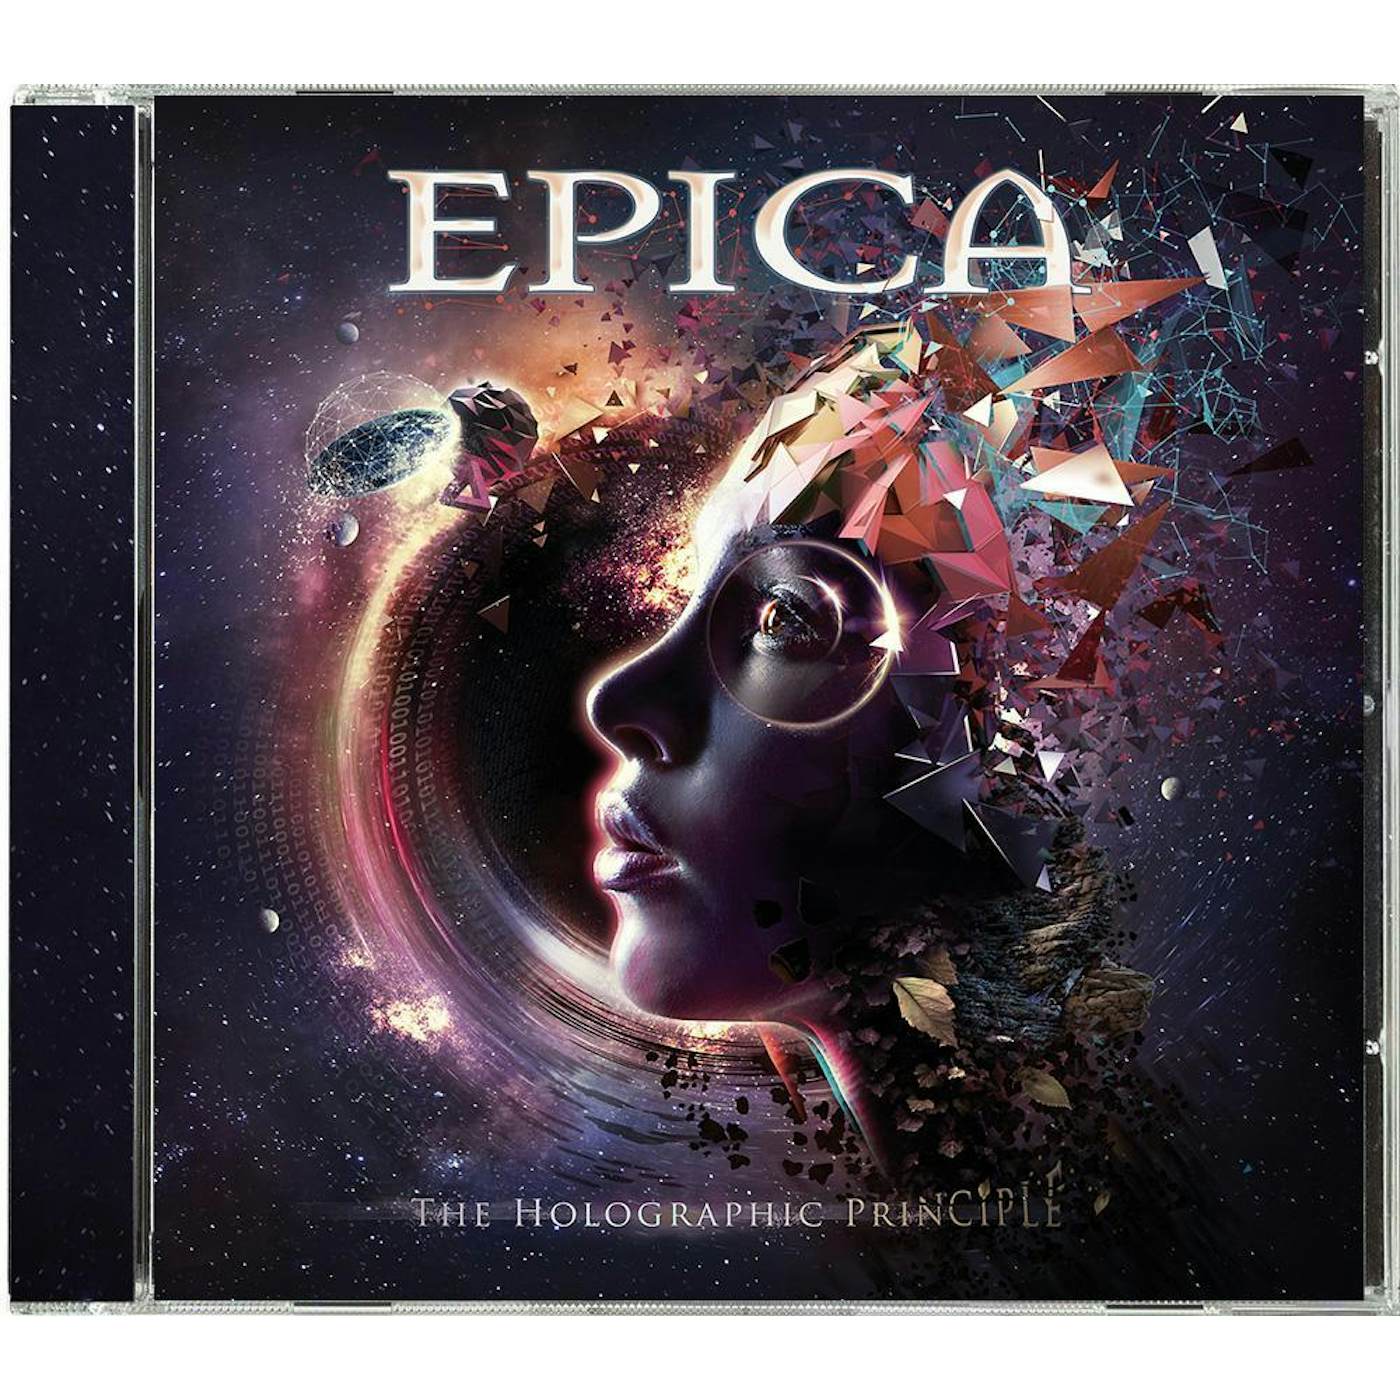 Epica "The Holographic Principle" CD